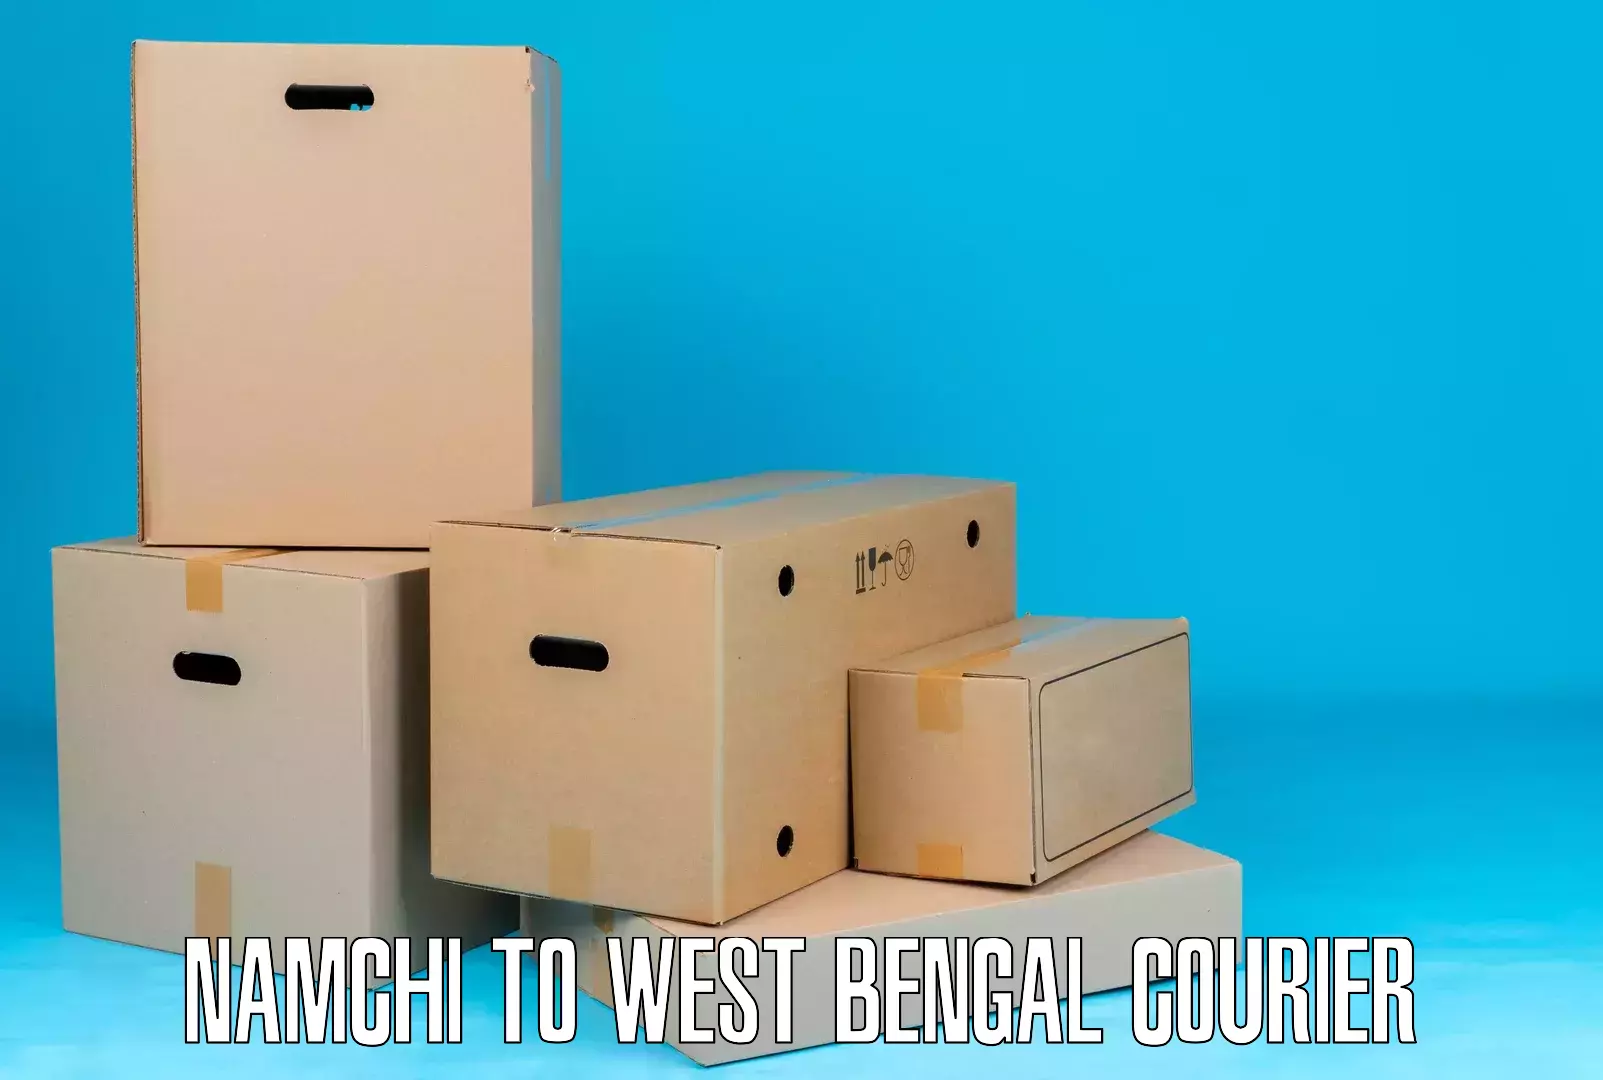 Subscription-based courier Namchi to West Bengal